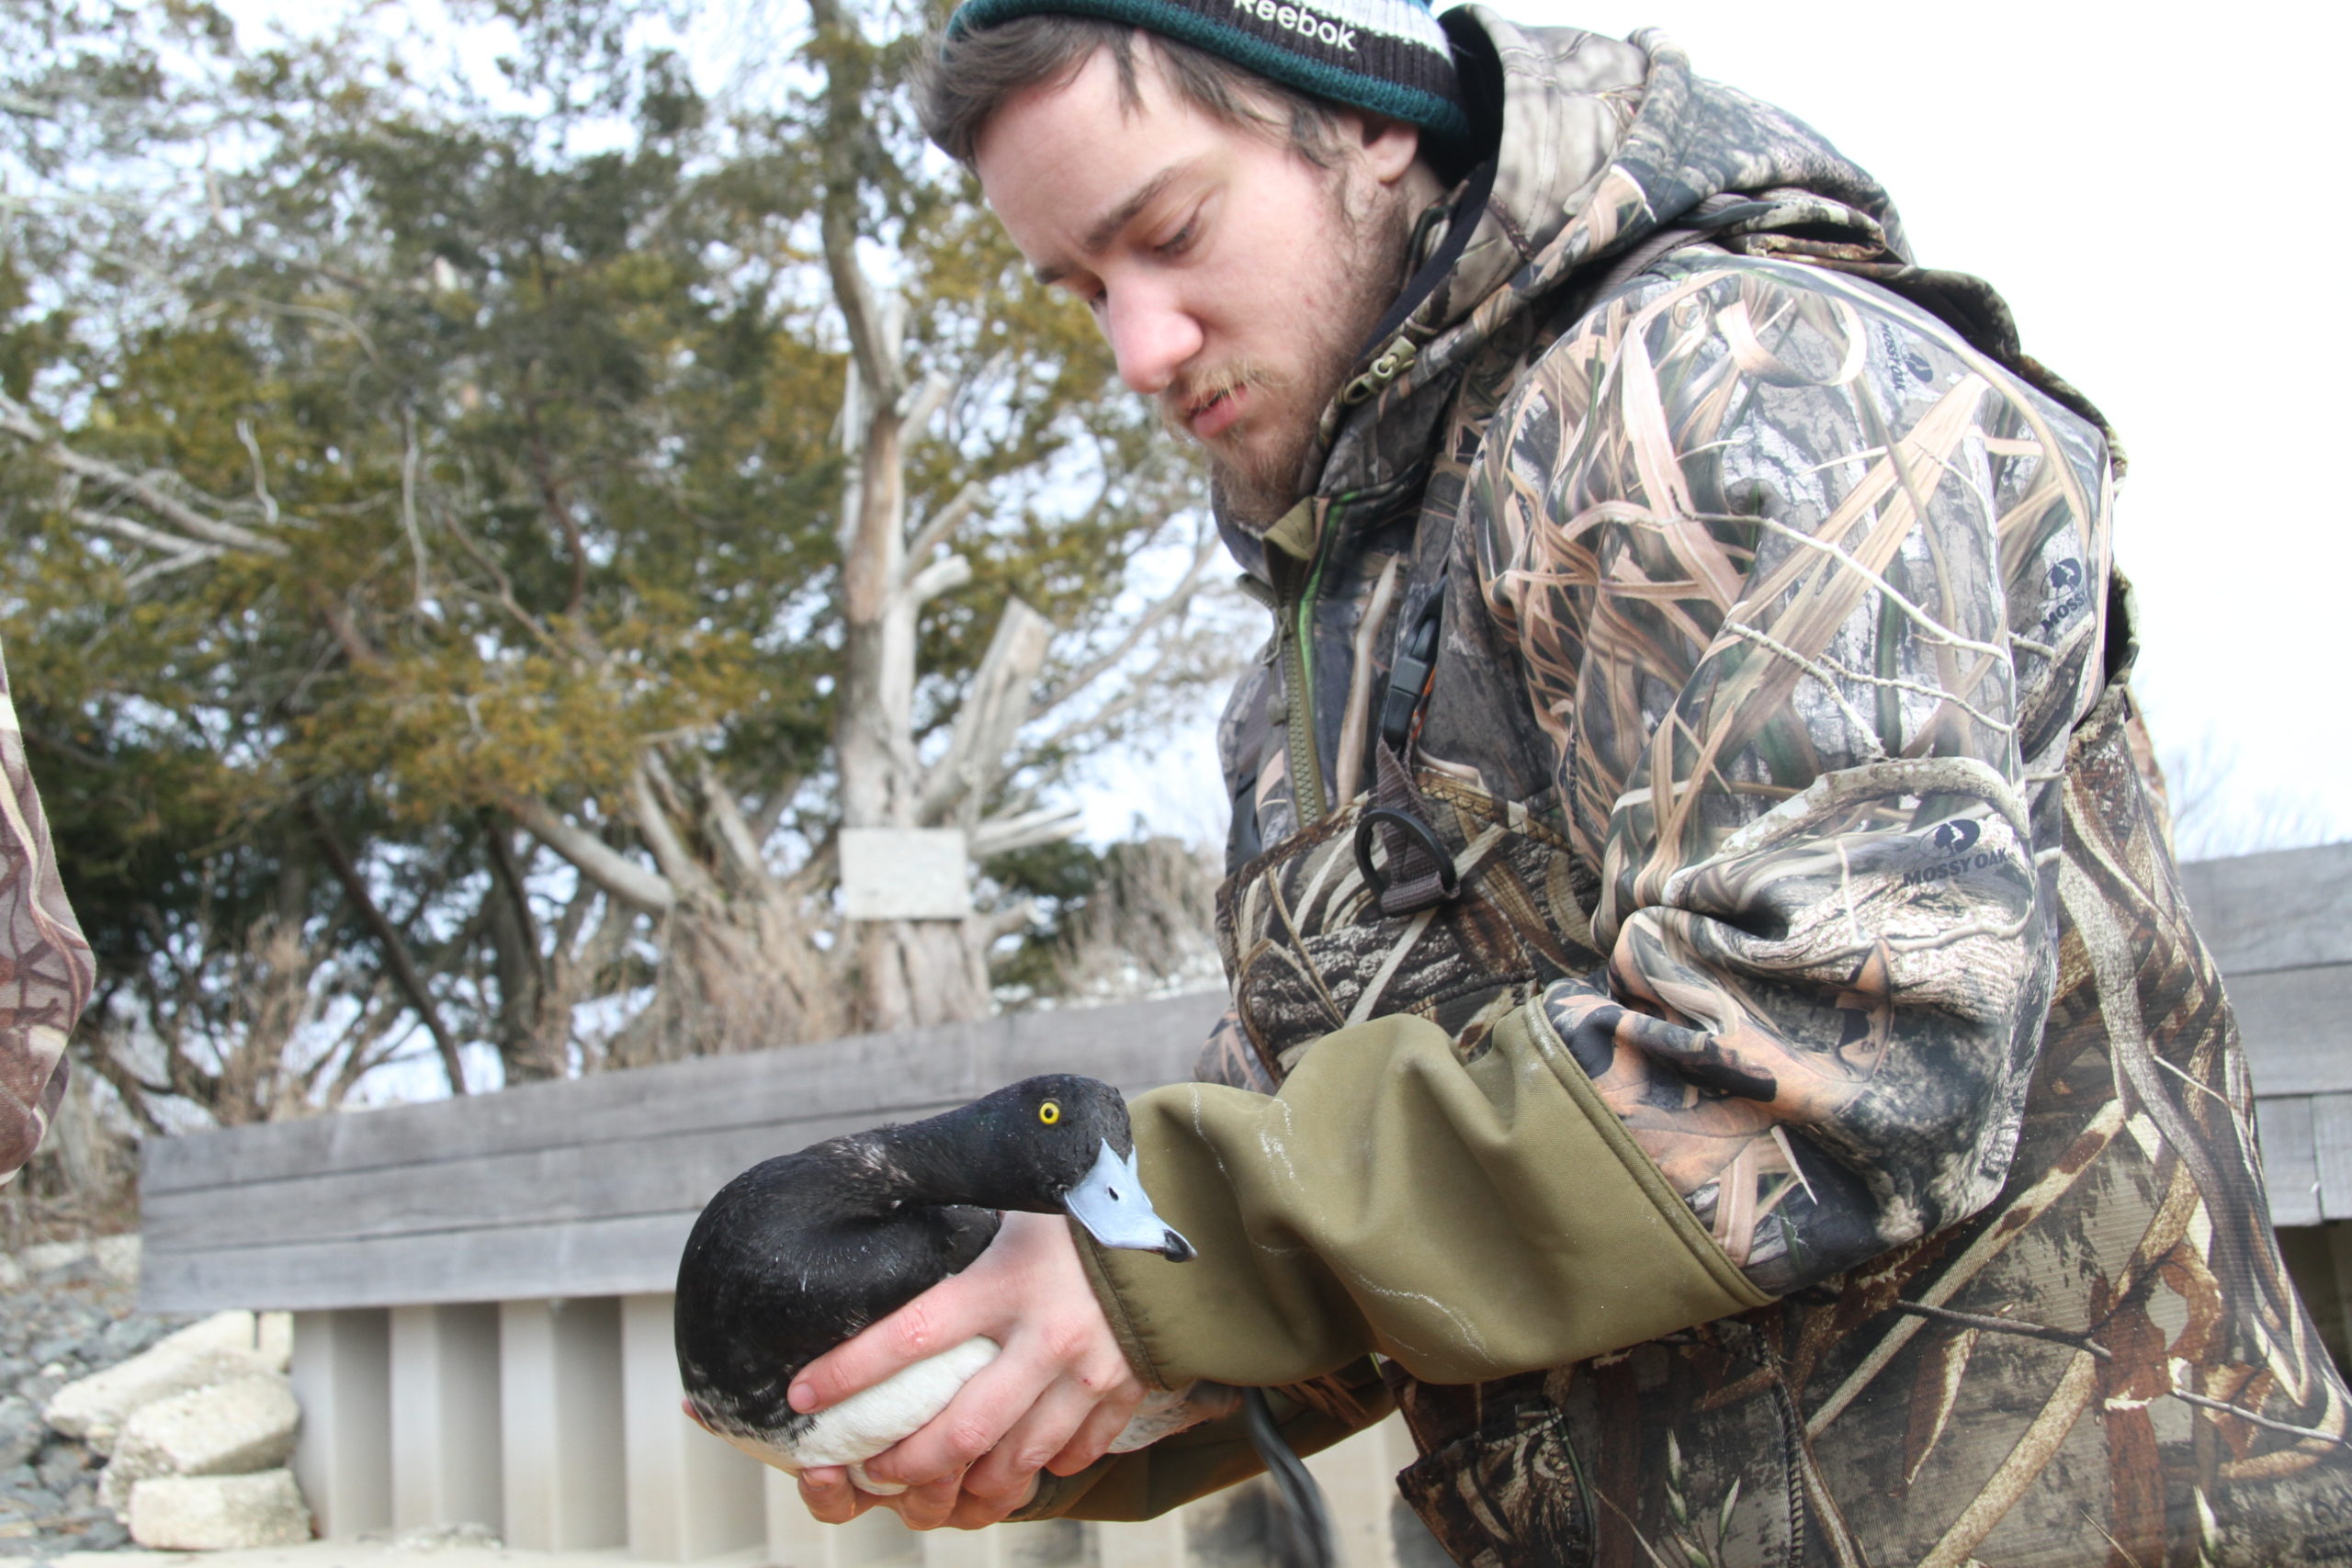 The Long Island Wildfowl Heritage Group and SUNY College of Environmental Science and Forestry are teaming up to band scaup ducks in local bays.